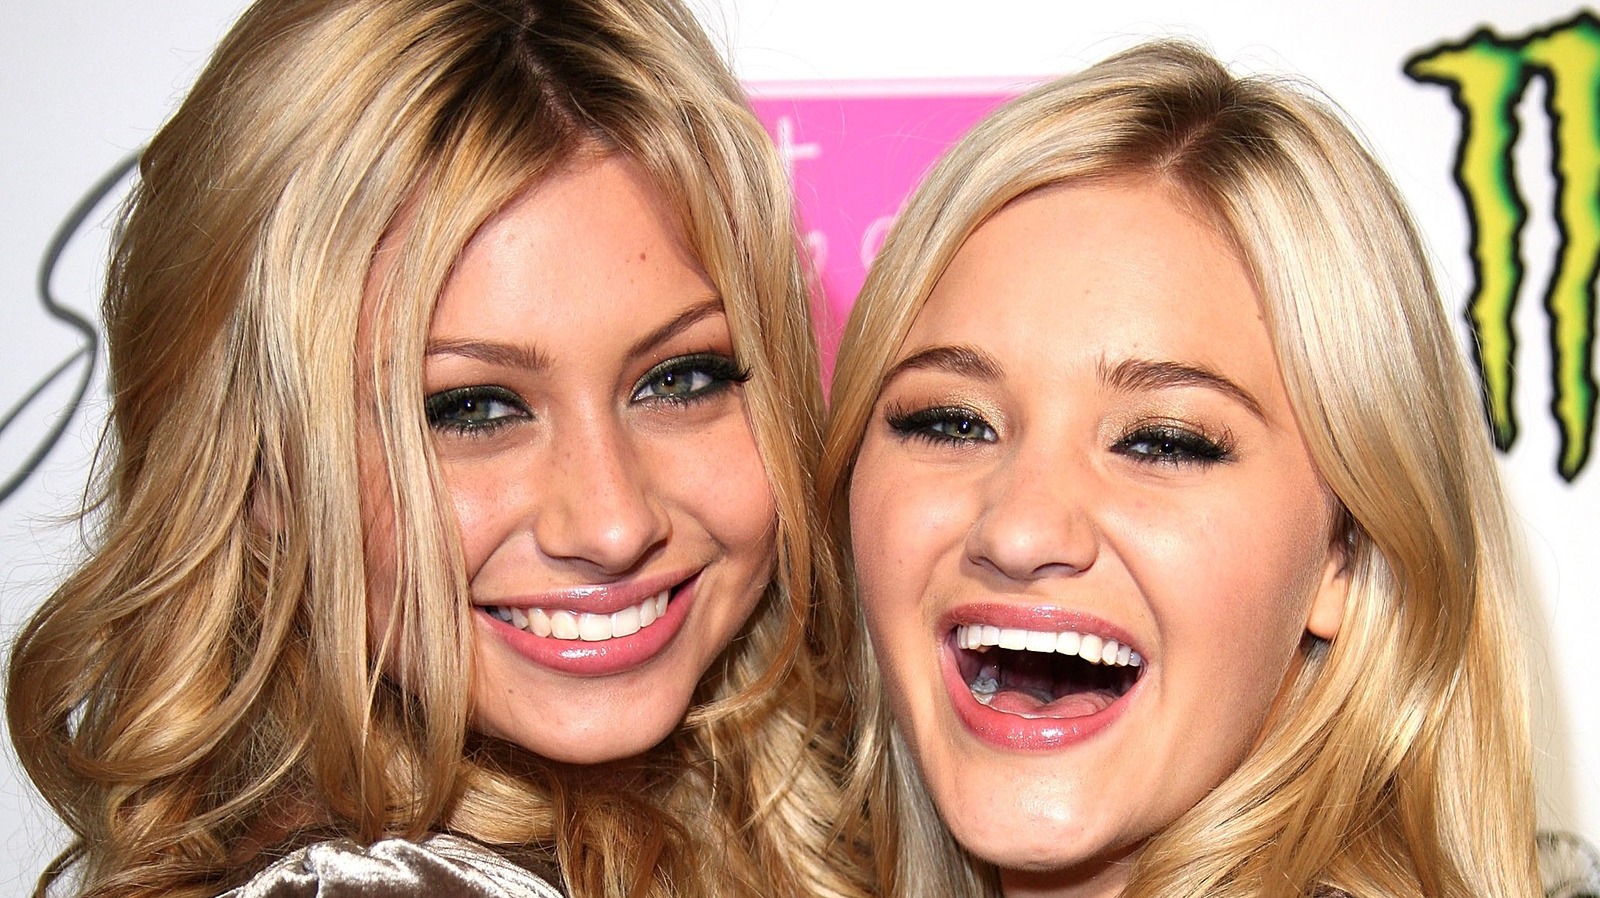 Whatever Happened To Aly And AJ Michalka? 